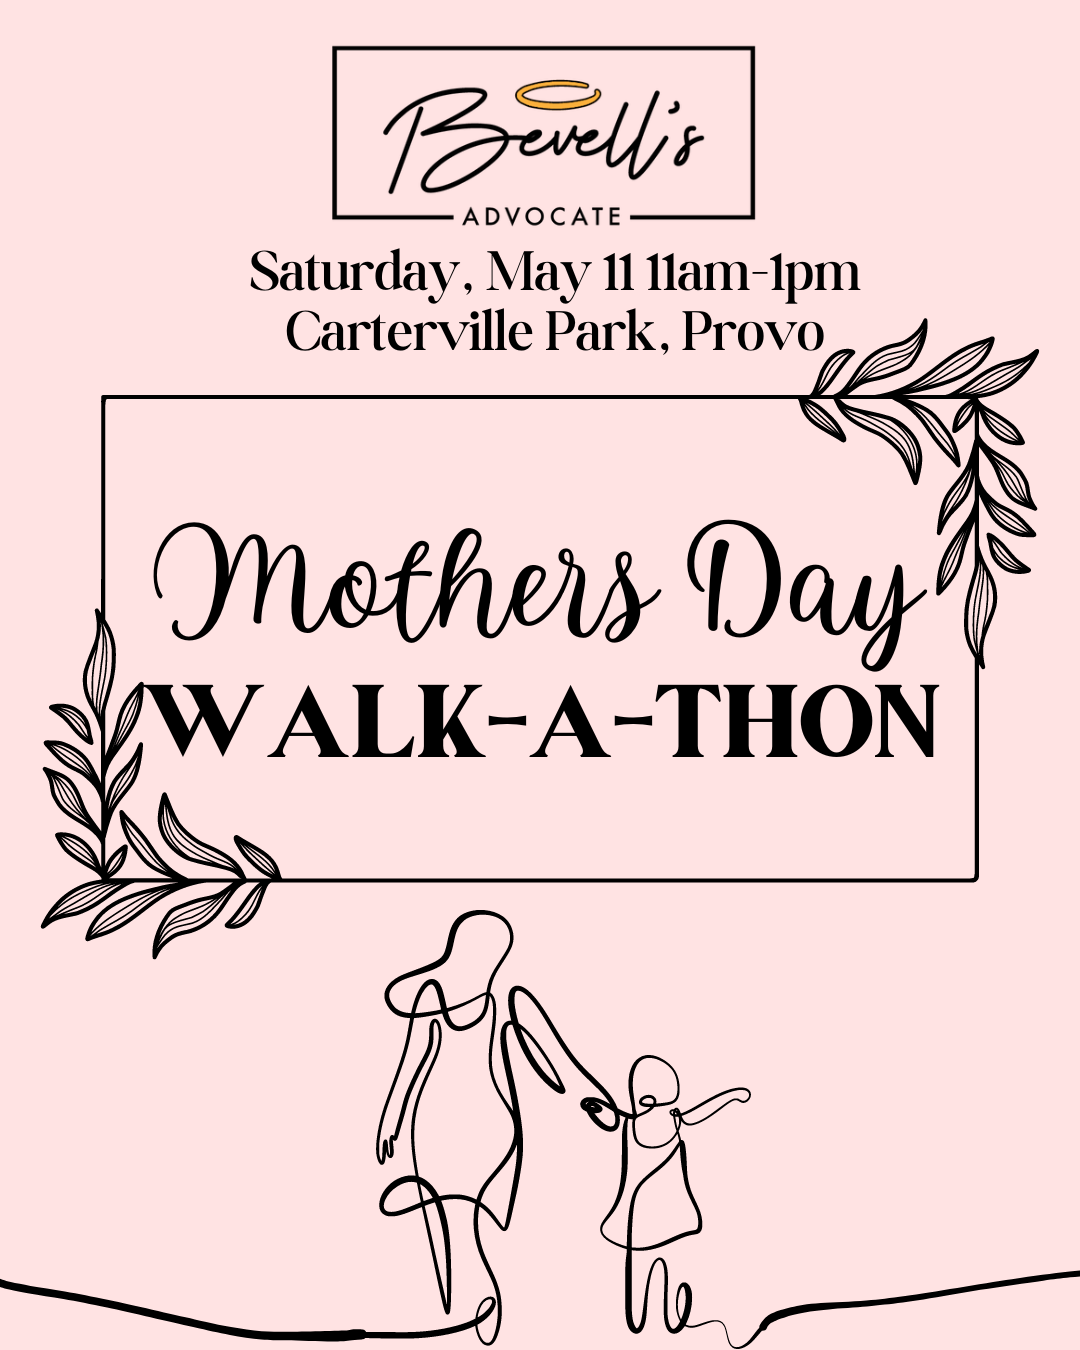 Bevell's Advocate to host Mother's Day walk-a-thon fundraiser